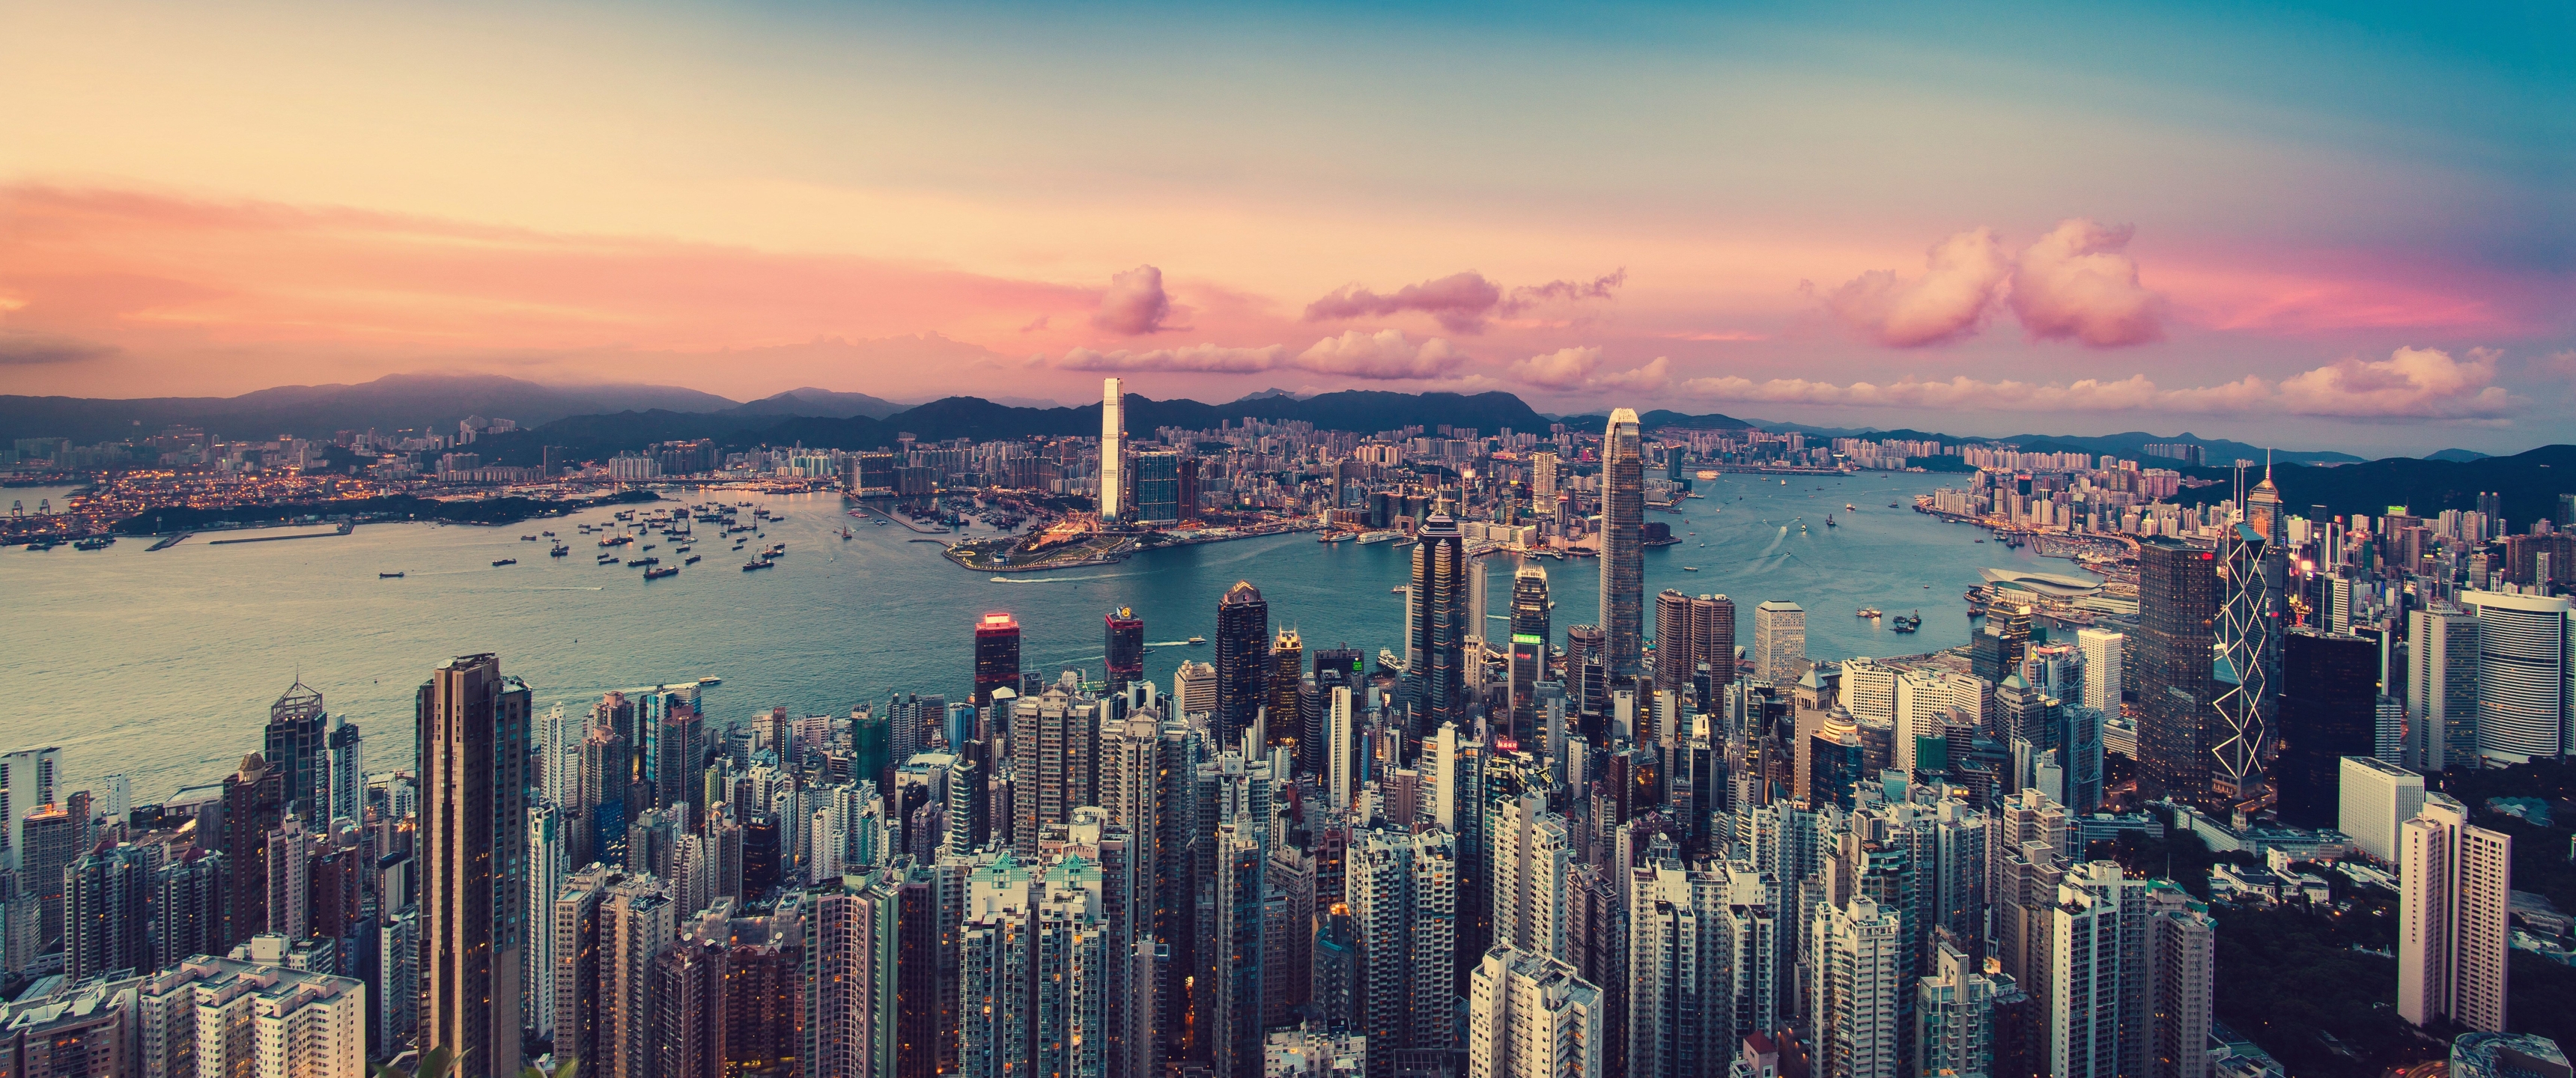 3440x1440 Hong Kong 8K 3440x1440 Resolution Wallpaper, HD City 4K Wallpapers,  Images, Photos and Background - Wallpapers Den